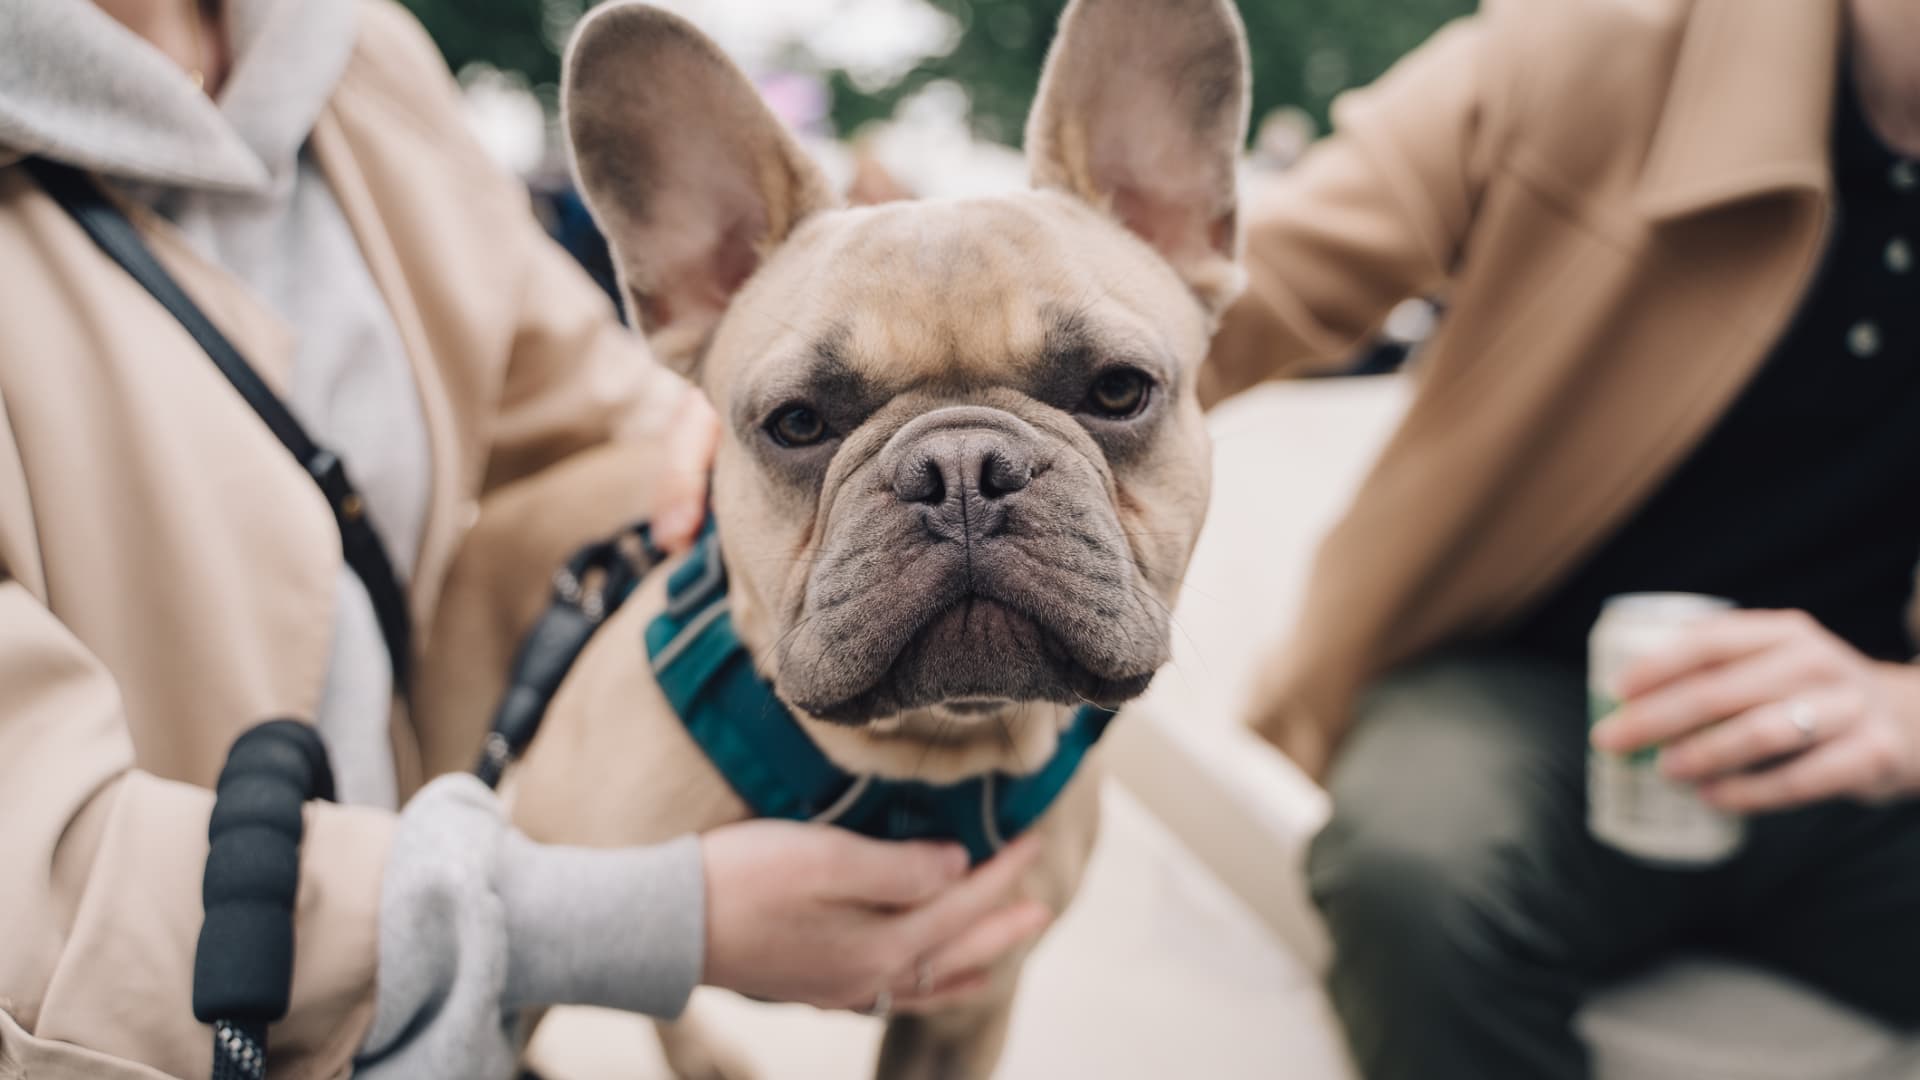 The French Bulldog is the No. 1 most popular dog breed in the U.S.